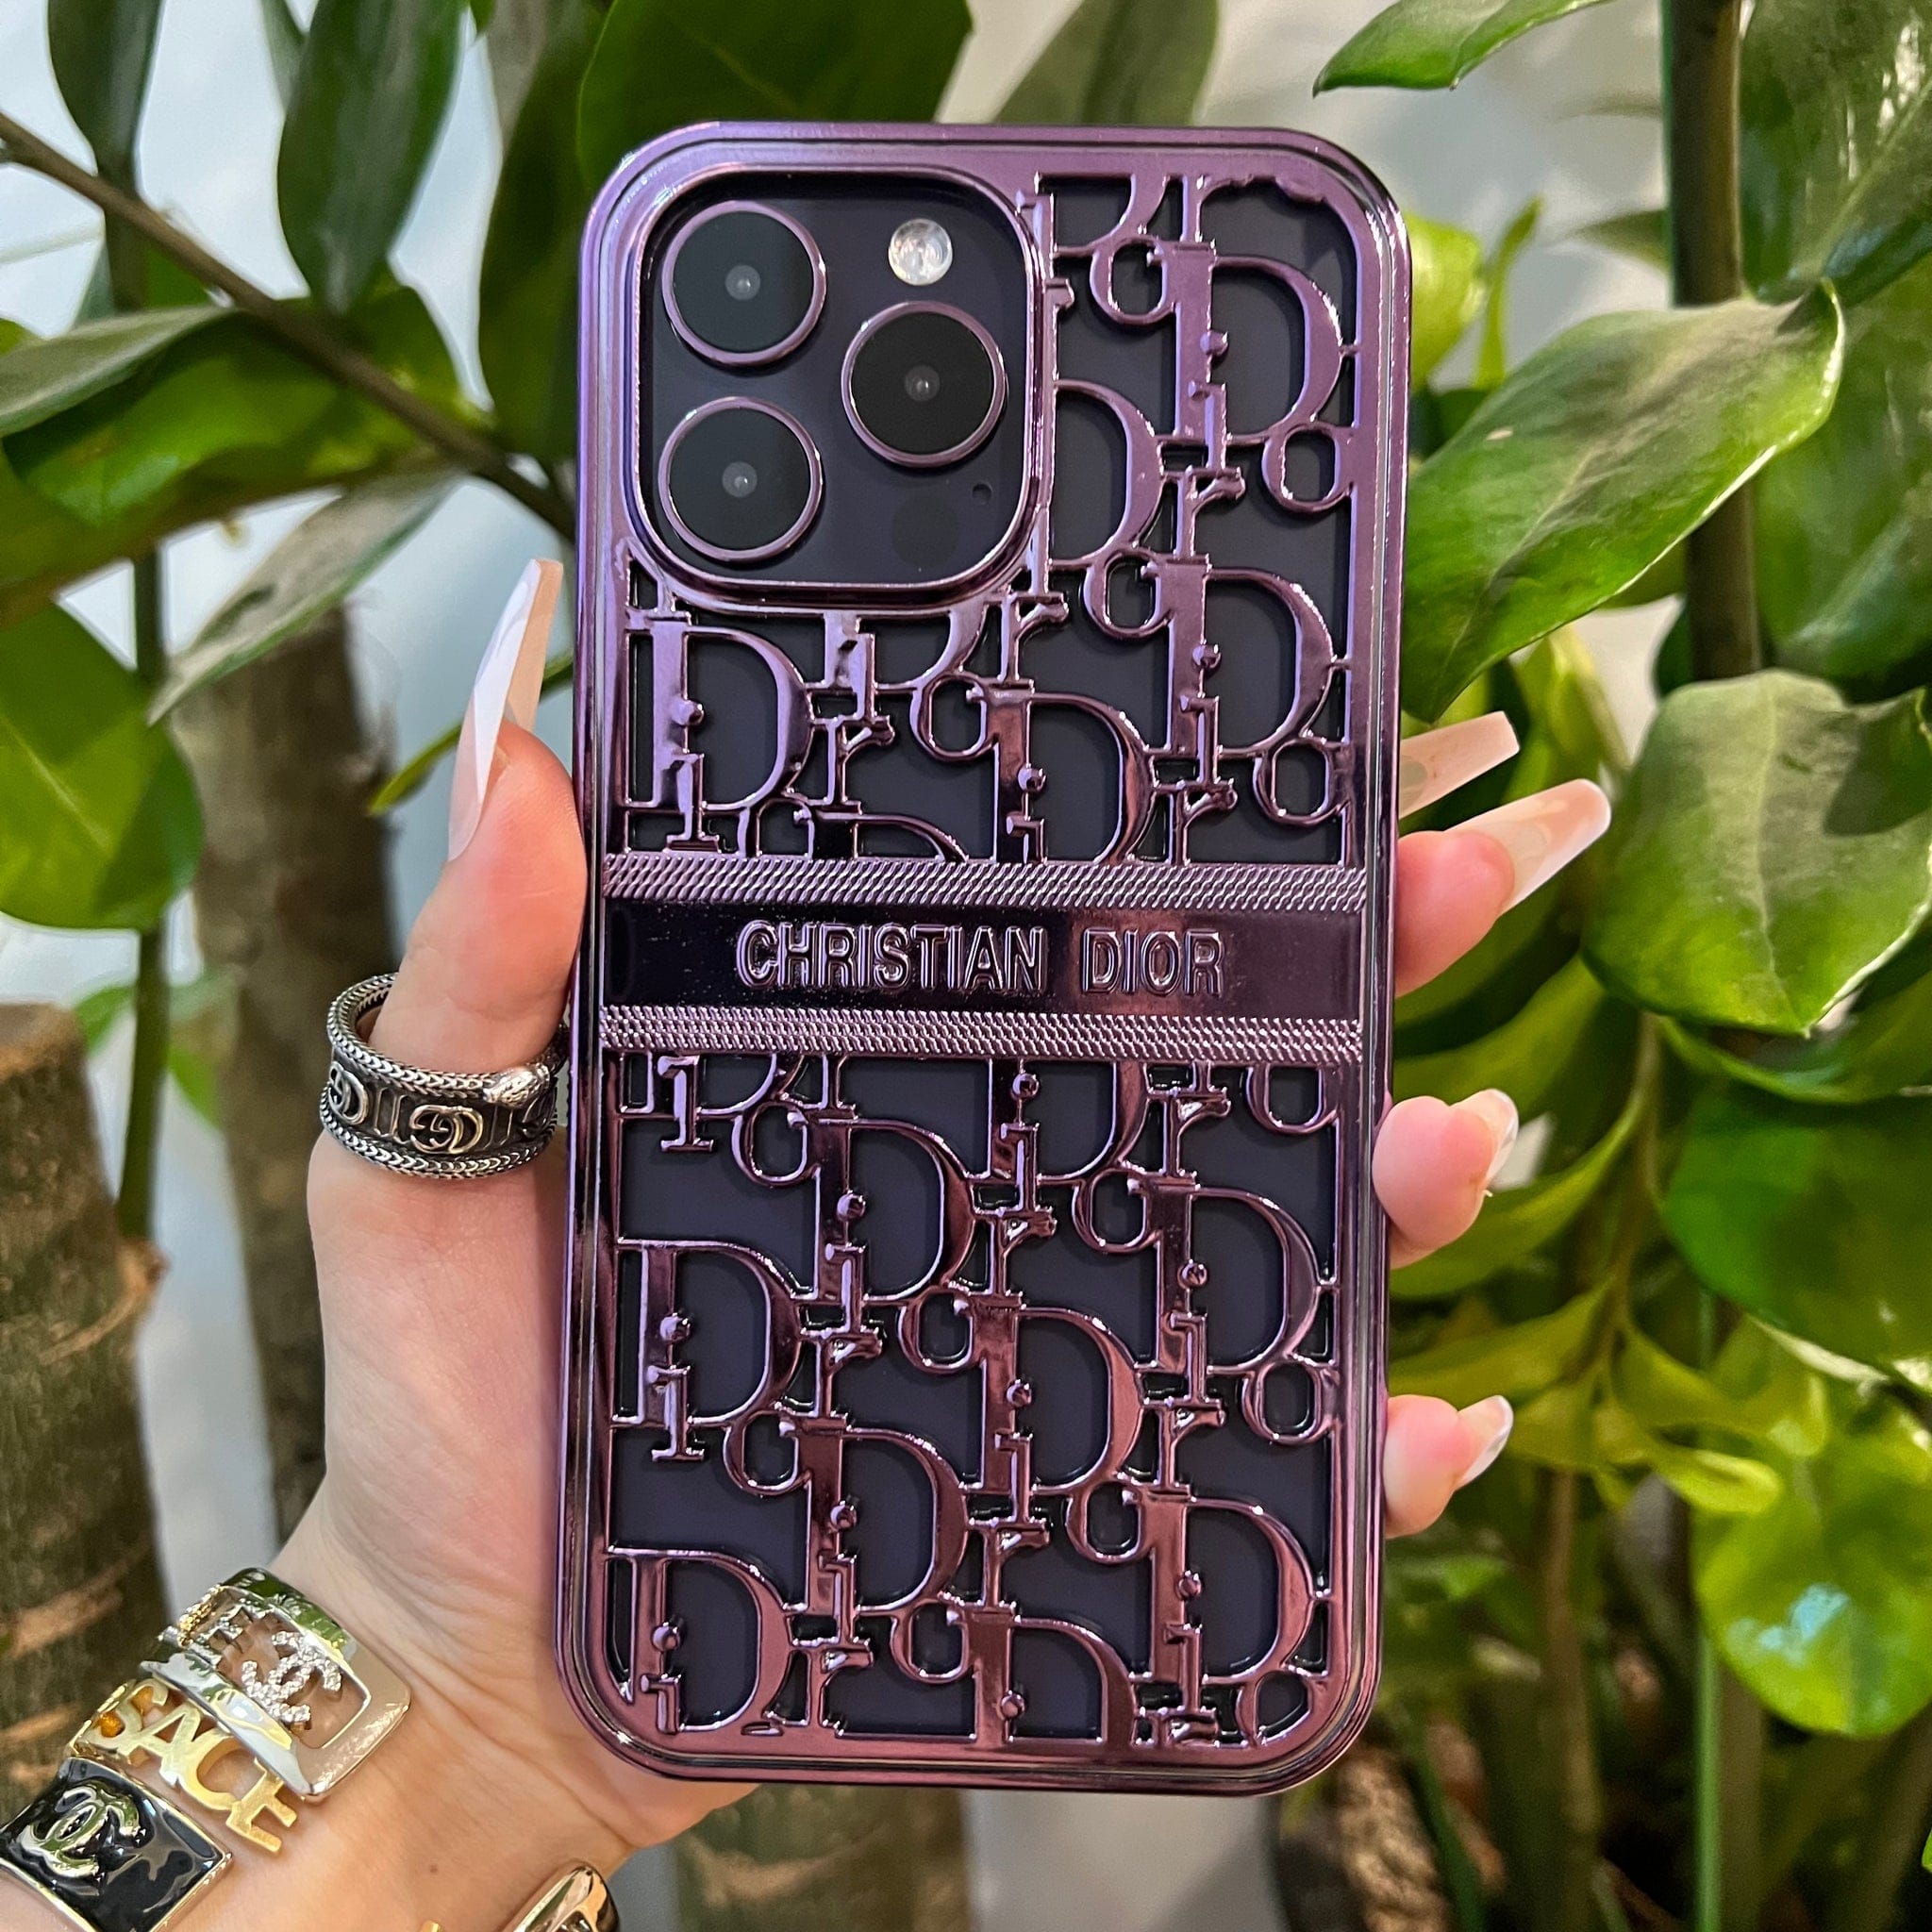 DD Hollow Out Design iPhone Case